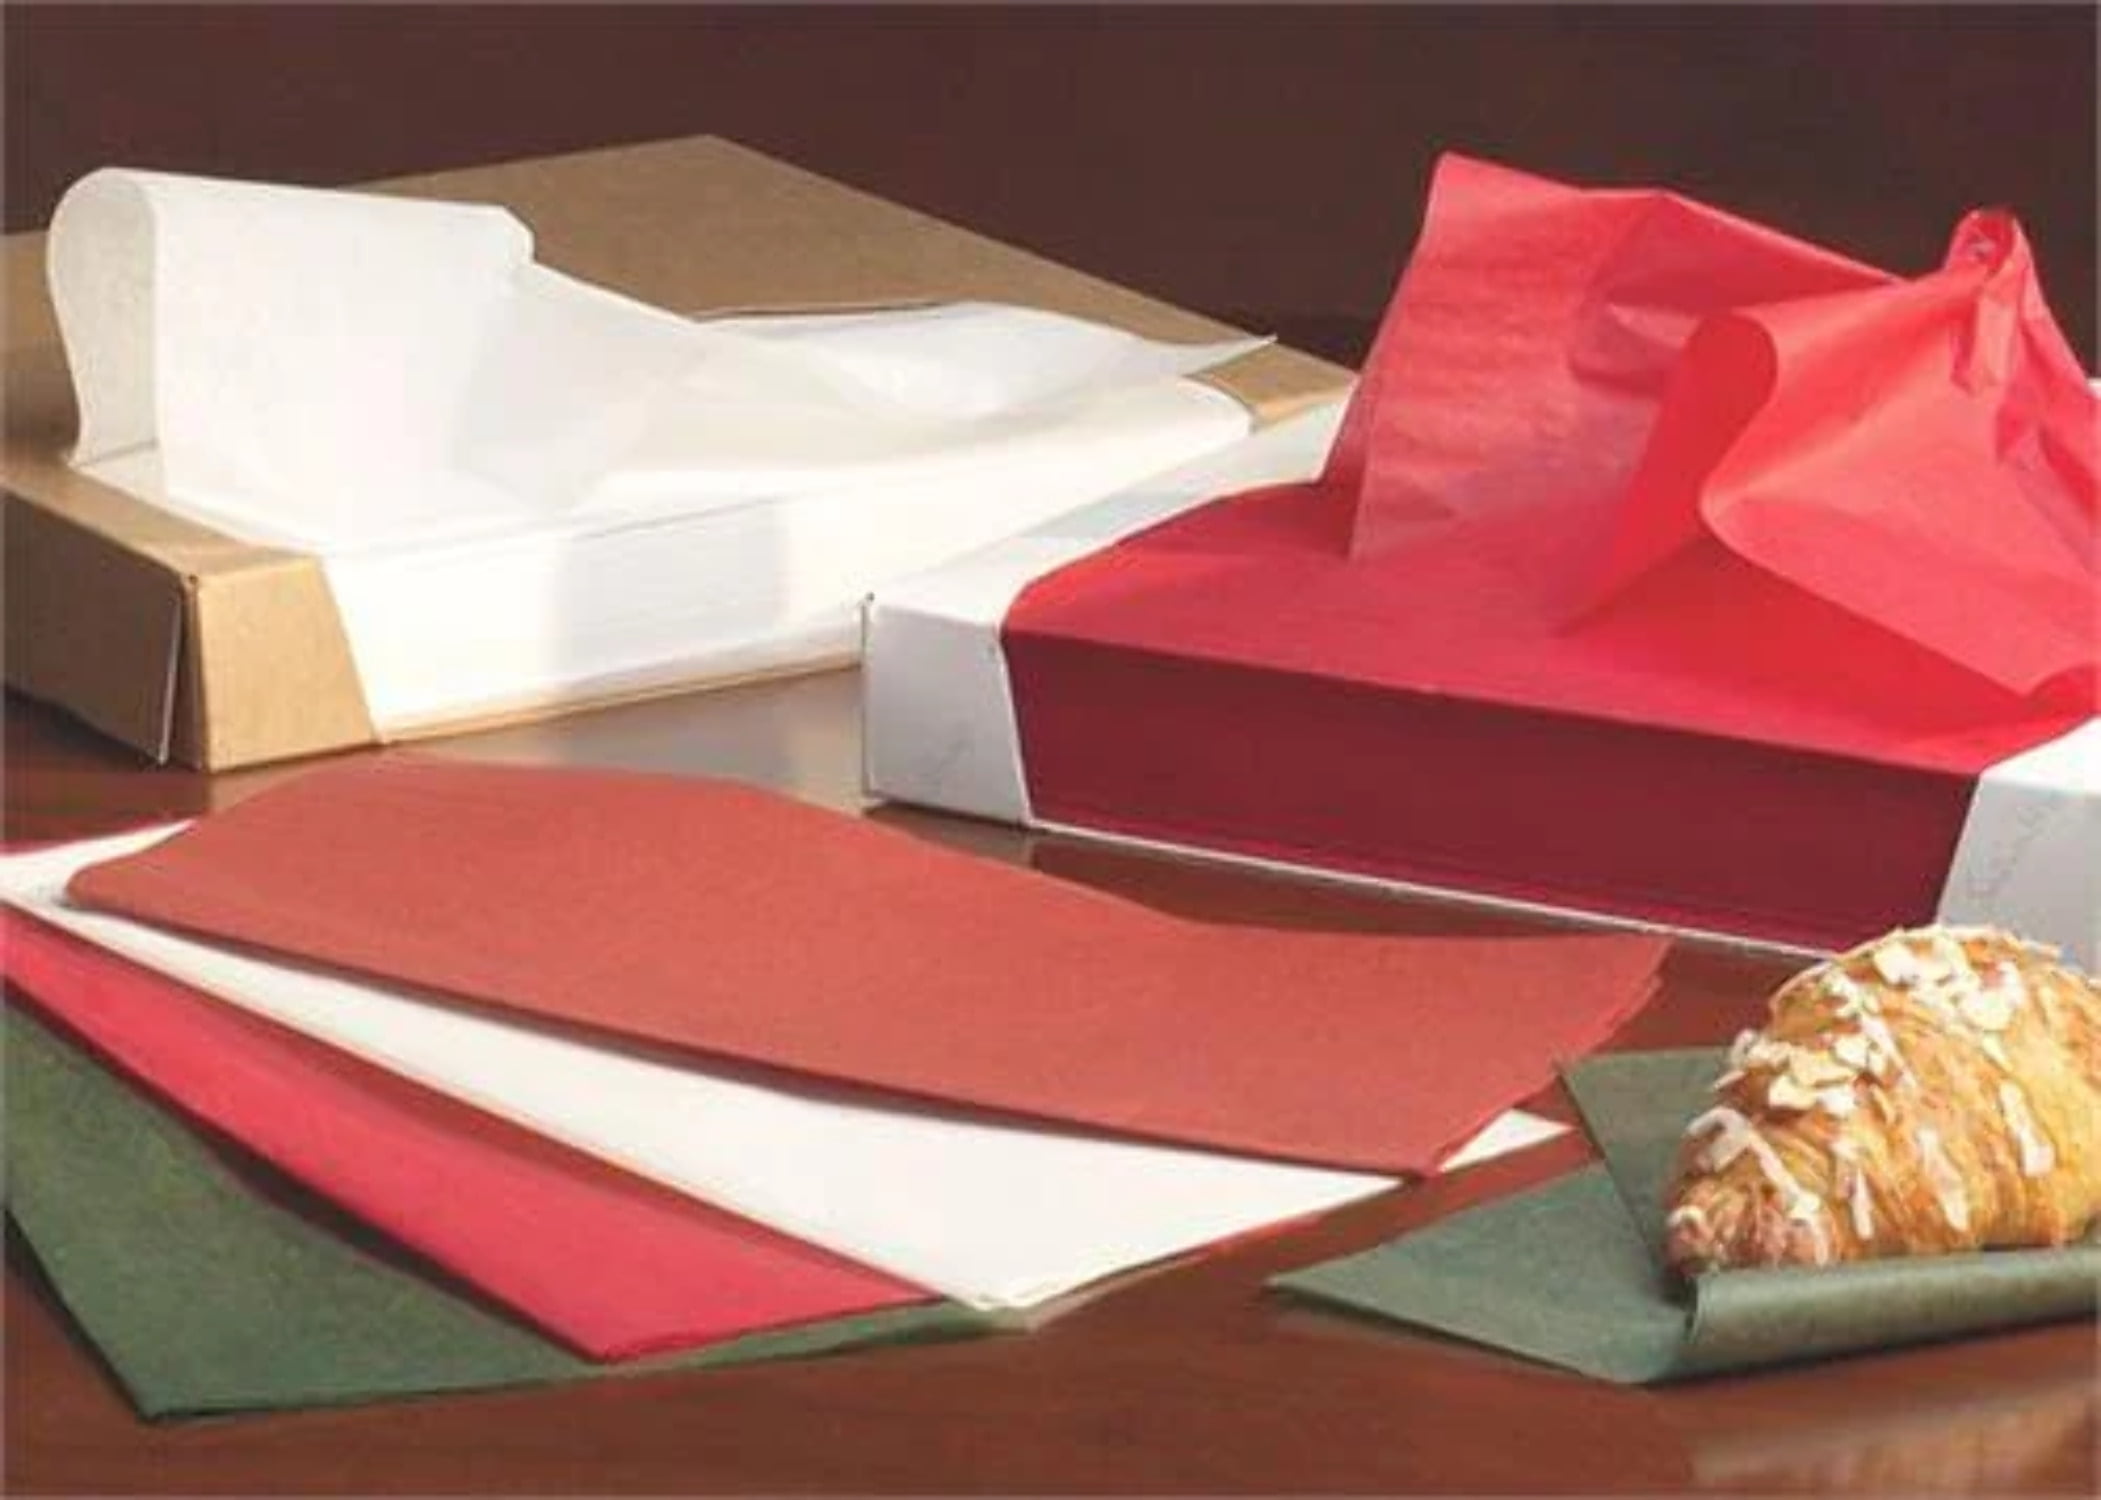 Naler 60 Sheets Metallic Gold Tissue Paper Bulk,15 x 20 Gift Wrapping  Tissue for Party Packaging 